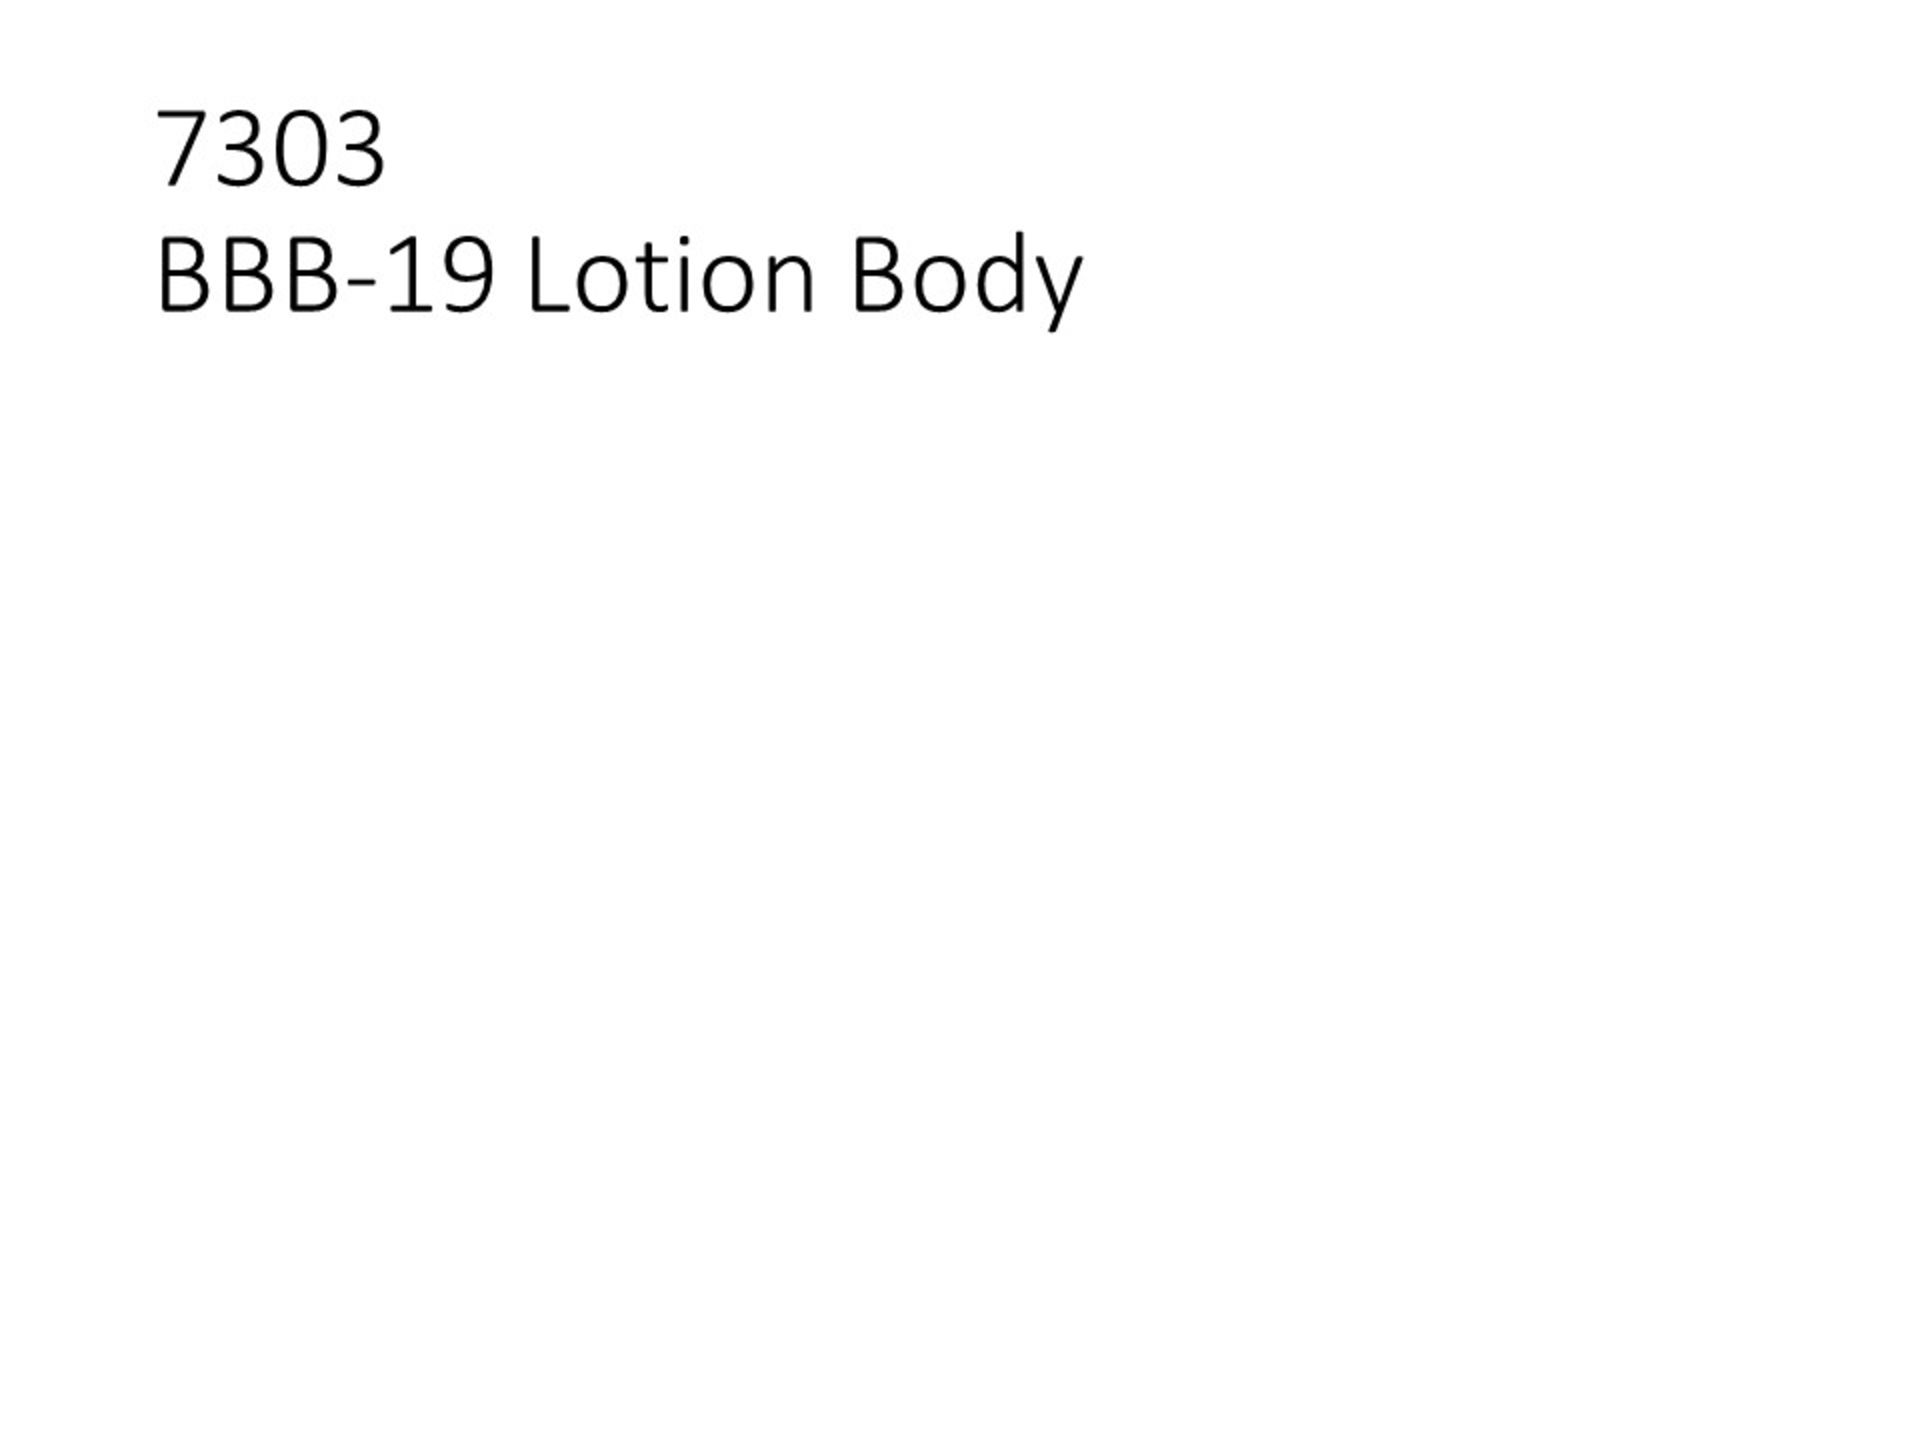 PLASTIC INJECTION MOLD - BBB-19 Lotion Body - Image 7 of 7